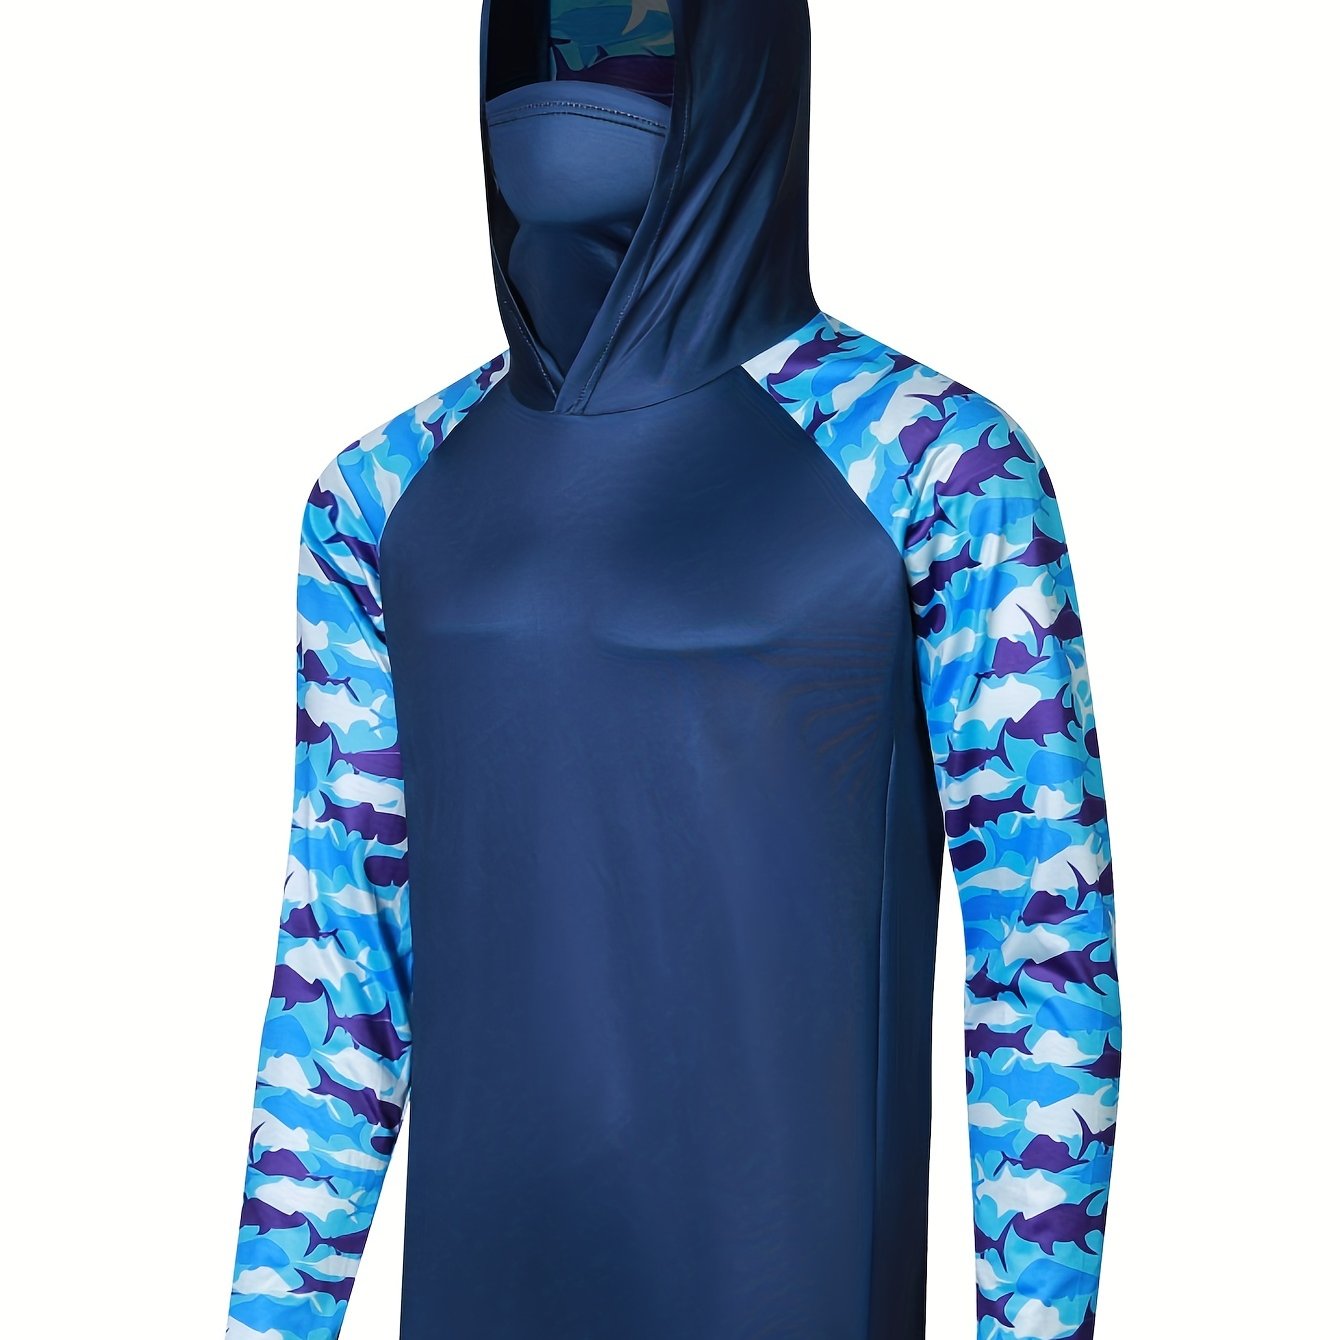 Men's Fashion Sun Protection UPF 50+ Rash Guard With Mask, Active Slightly  Stretch Breathable Quick Dry Hooded Top For Outdoor Fishing